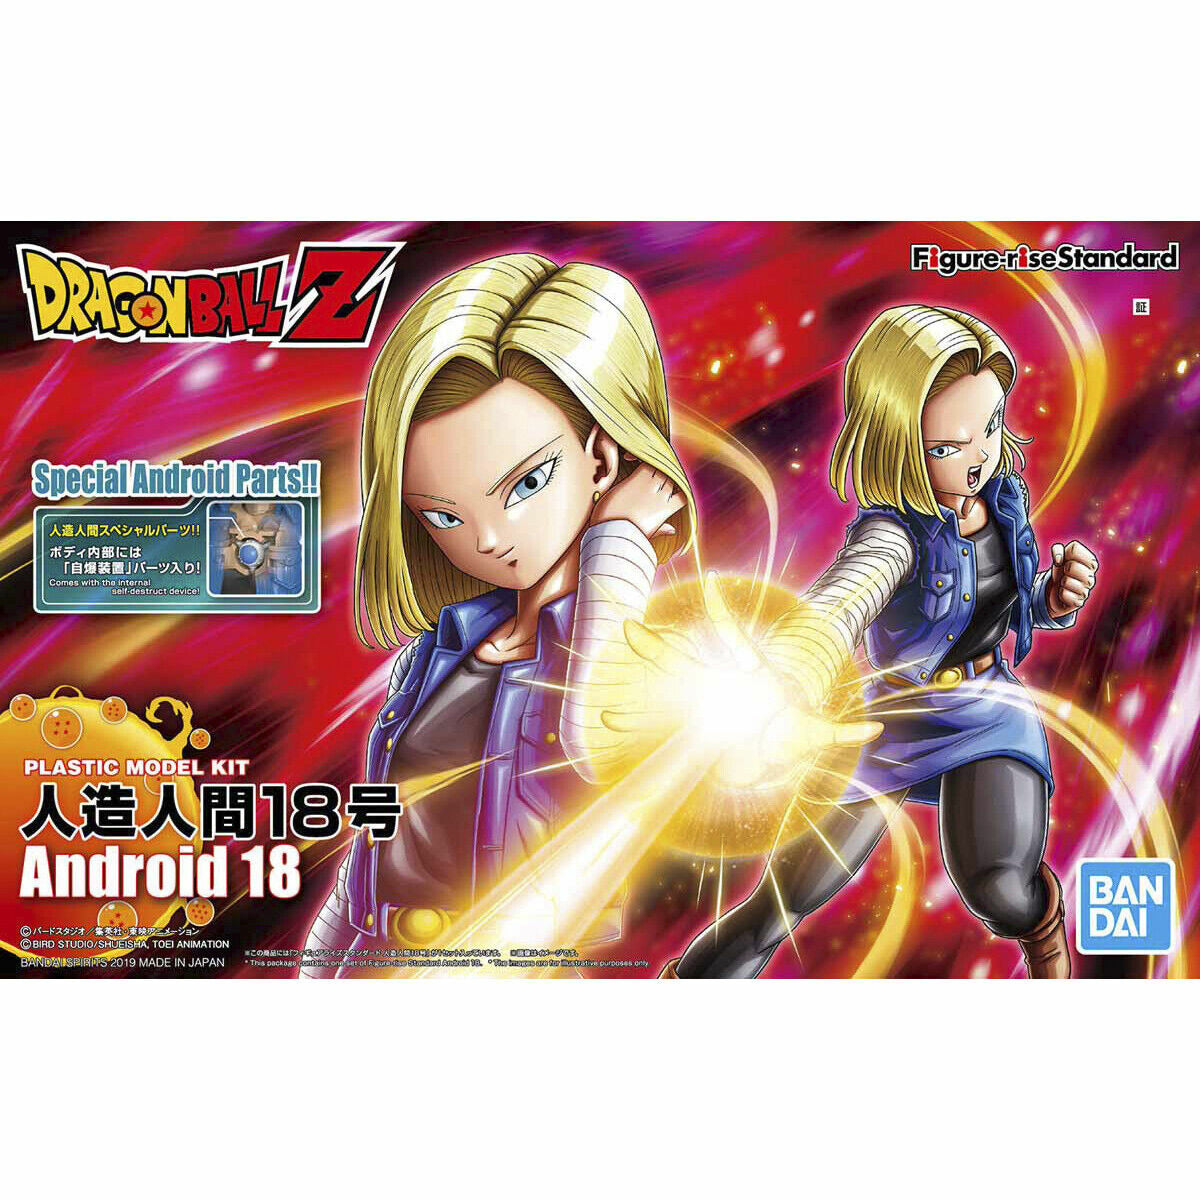 Android No. 18 - Figure-rise Standard #5058200 Dragon Ball Action Figure Model Kit by Bandai